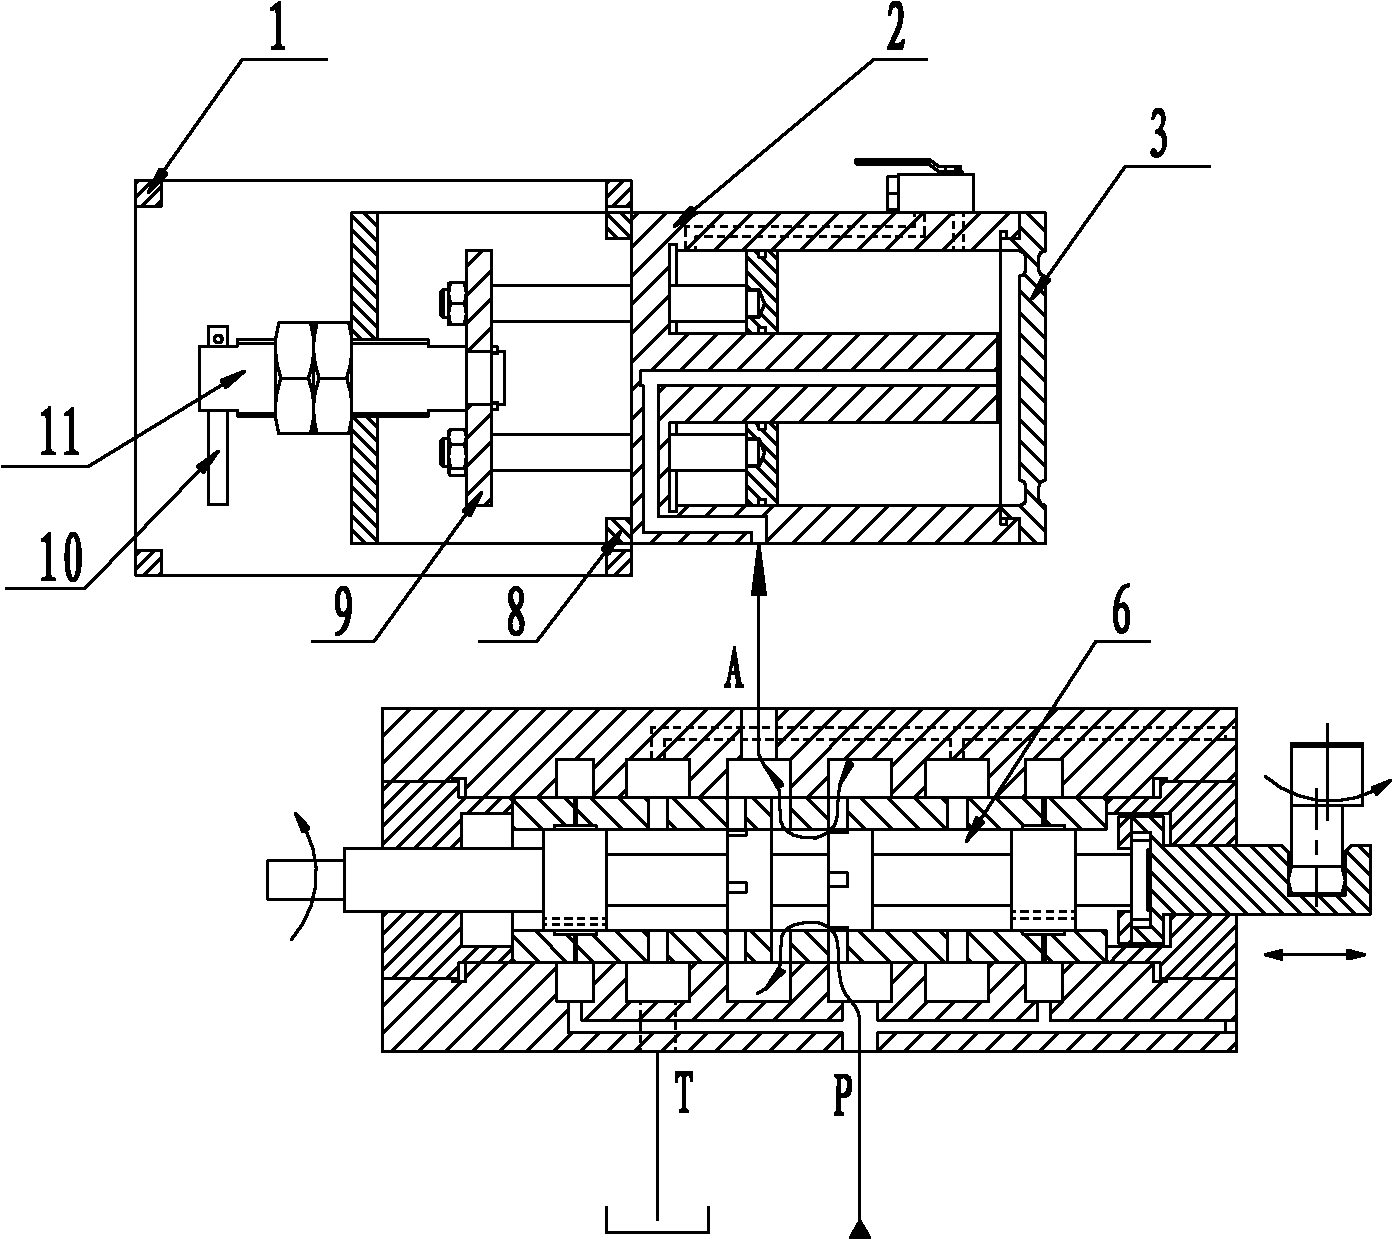 Novel high-frequency electro-hydraulic flutter generator